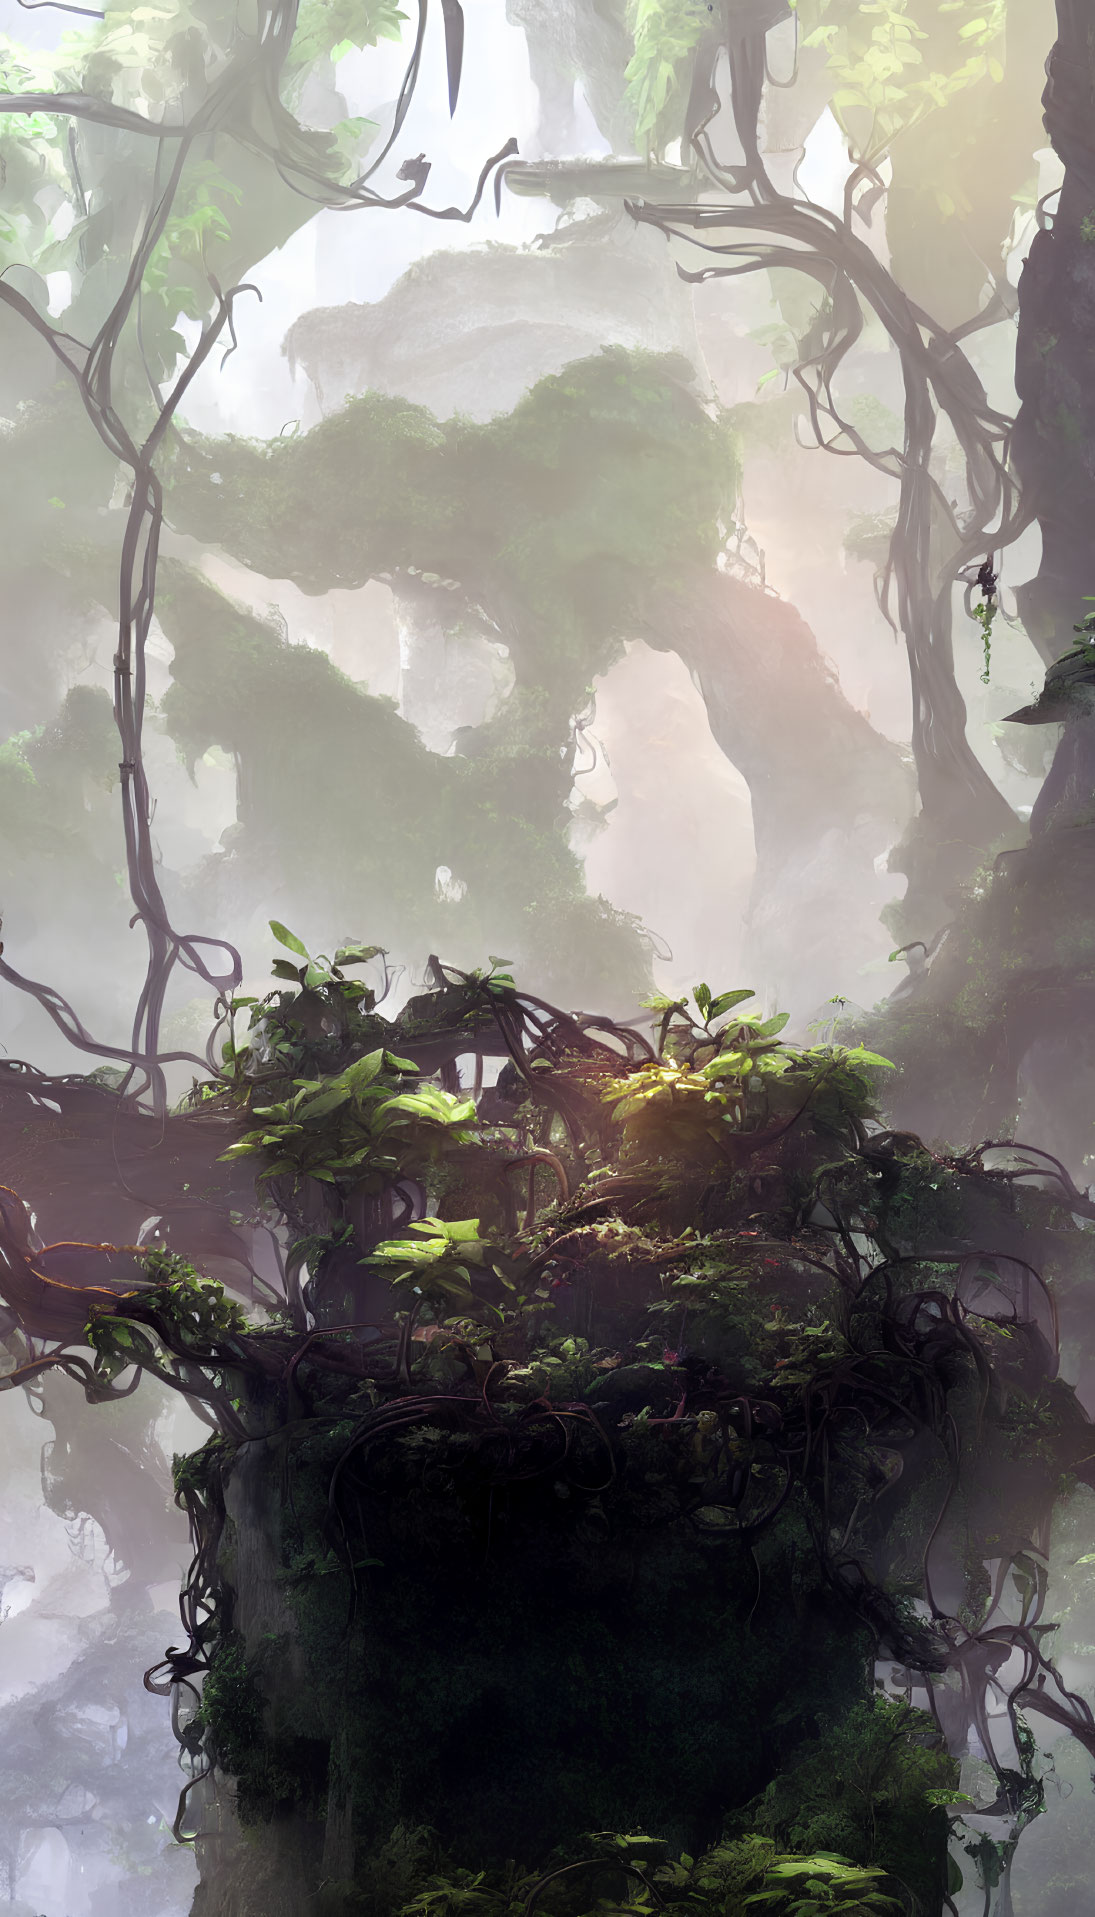 Lush, Green Forest with Intertwining Vines and Misty Veil